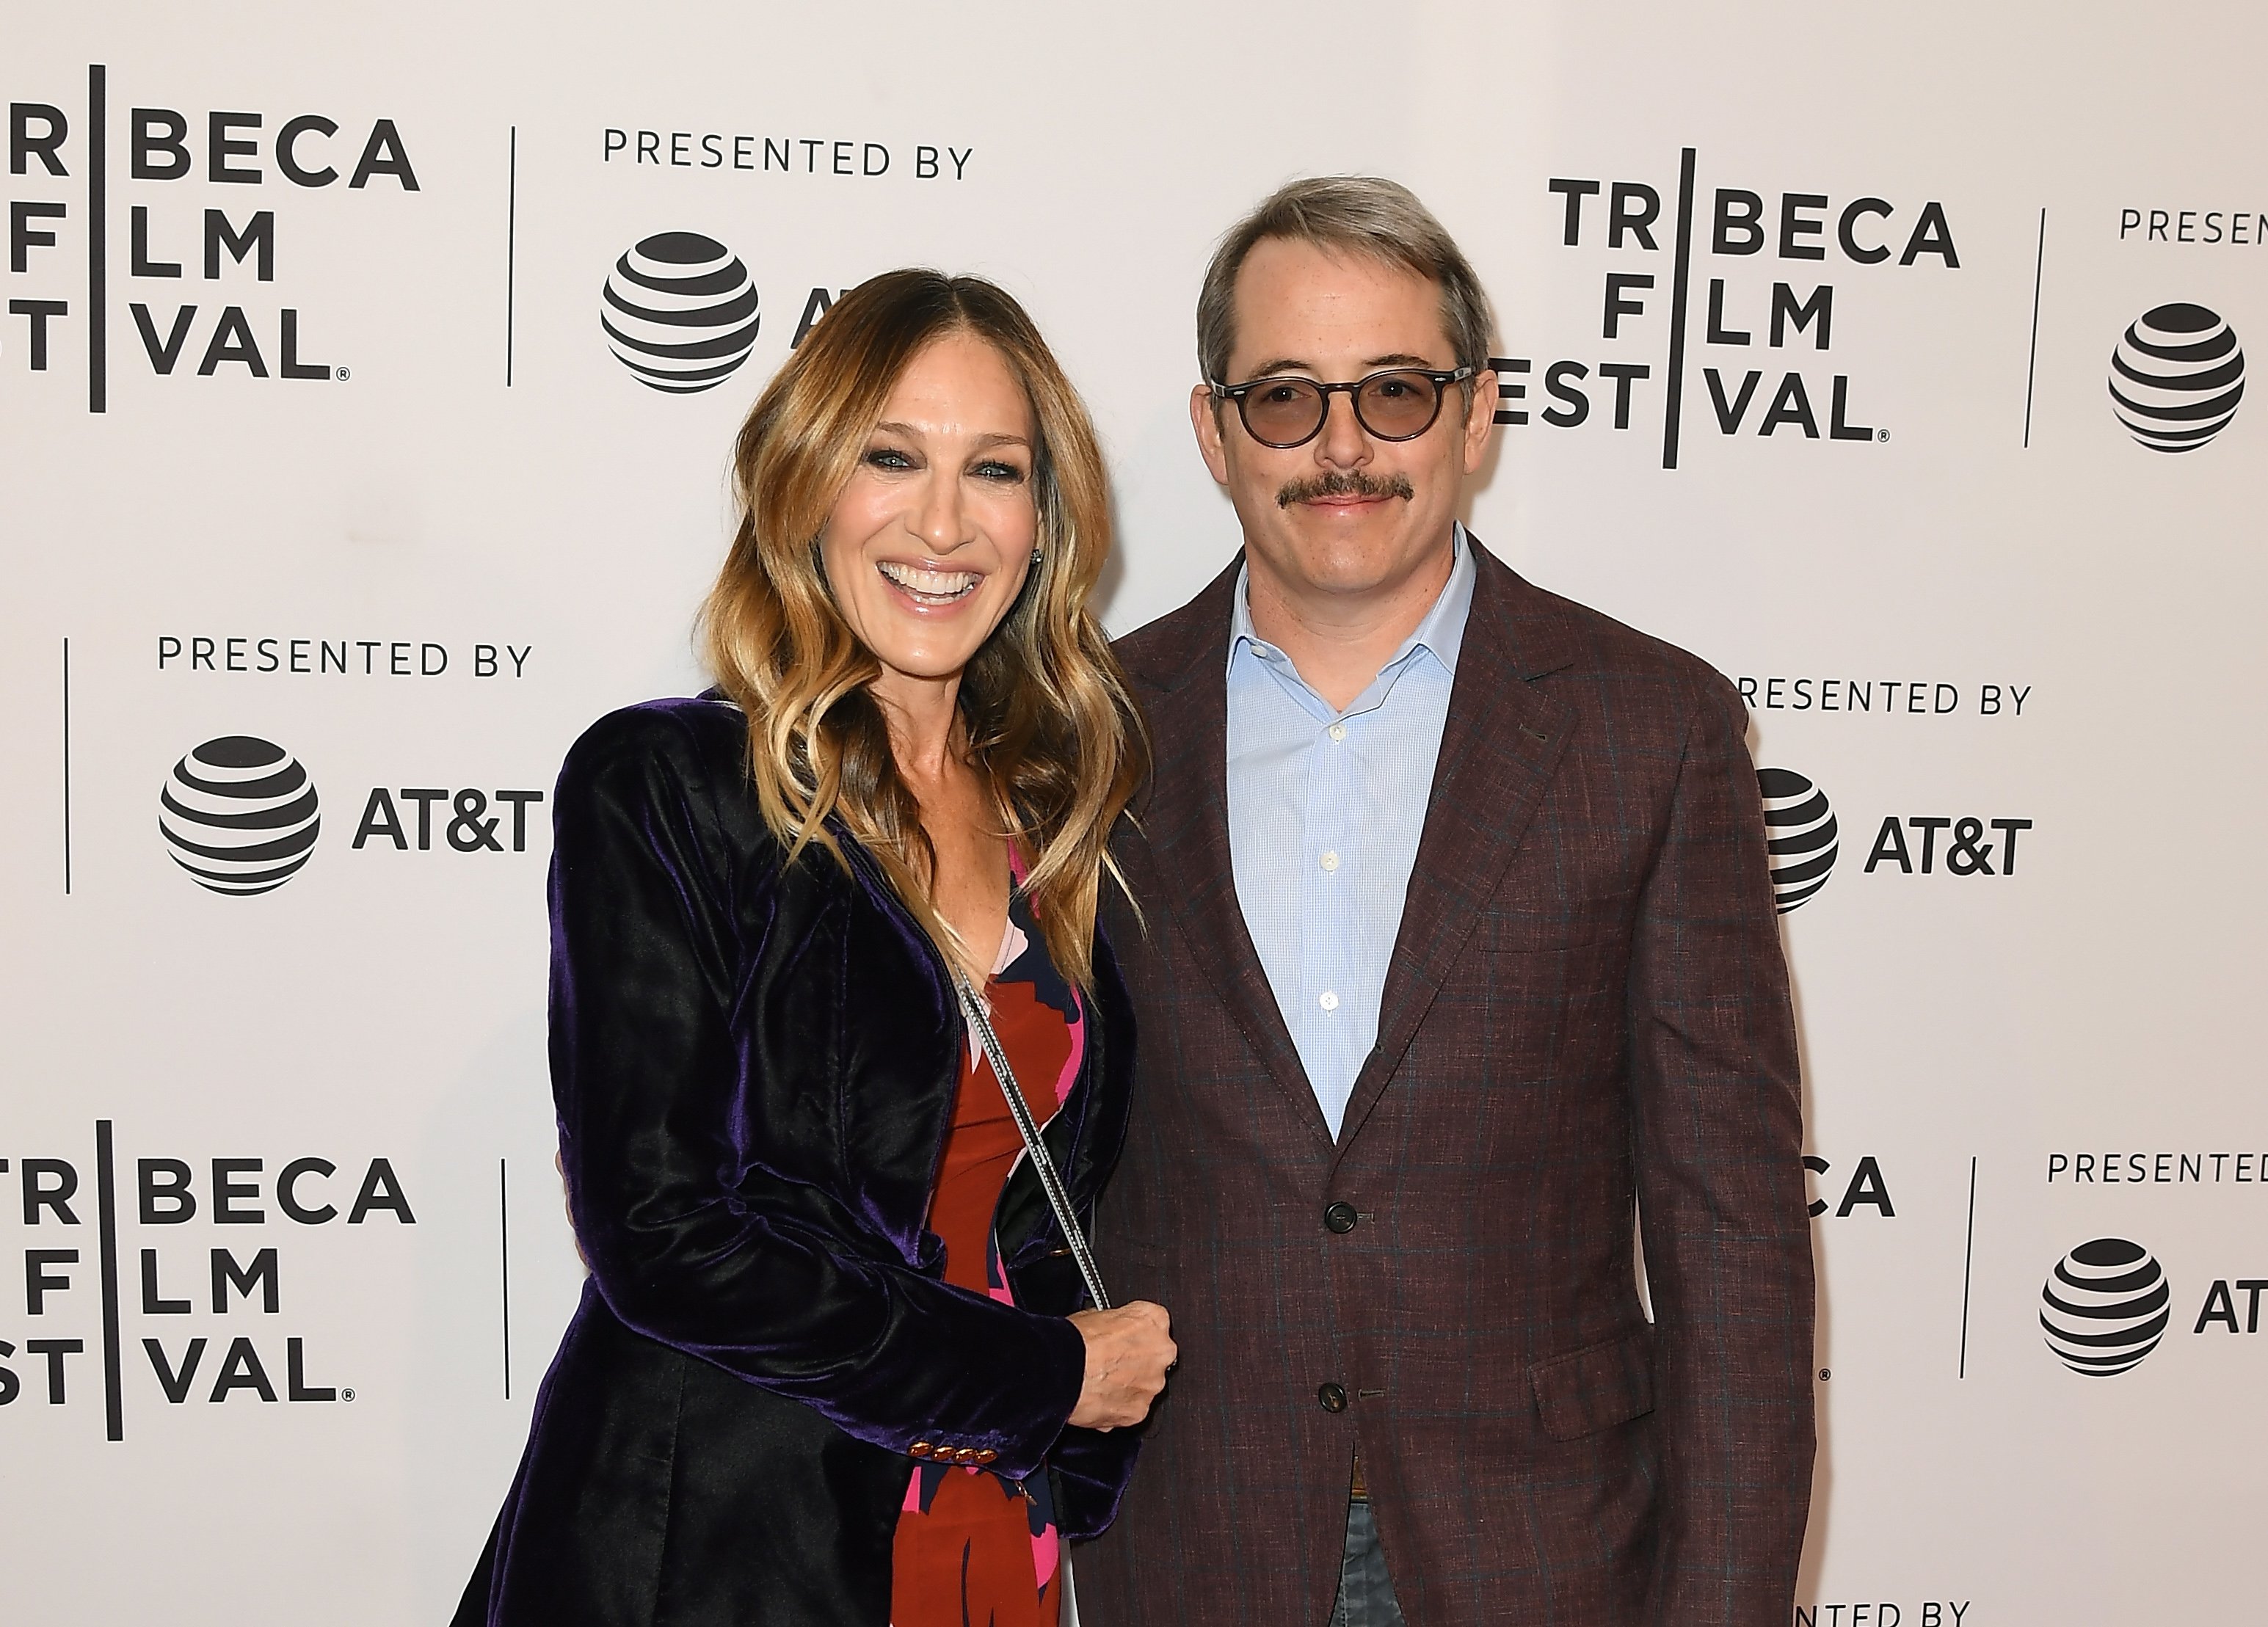 Sarah Jessica Parker and Matthew Broderick attend a screening of 'To Dust' during the 2018 Tribeca Film Festival at SVA Theatre on April 22, 2018 in New York City. | Source: Getty Images